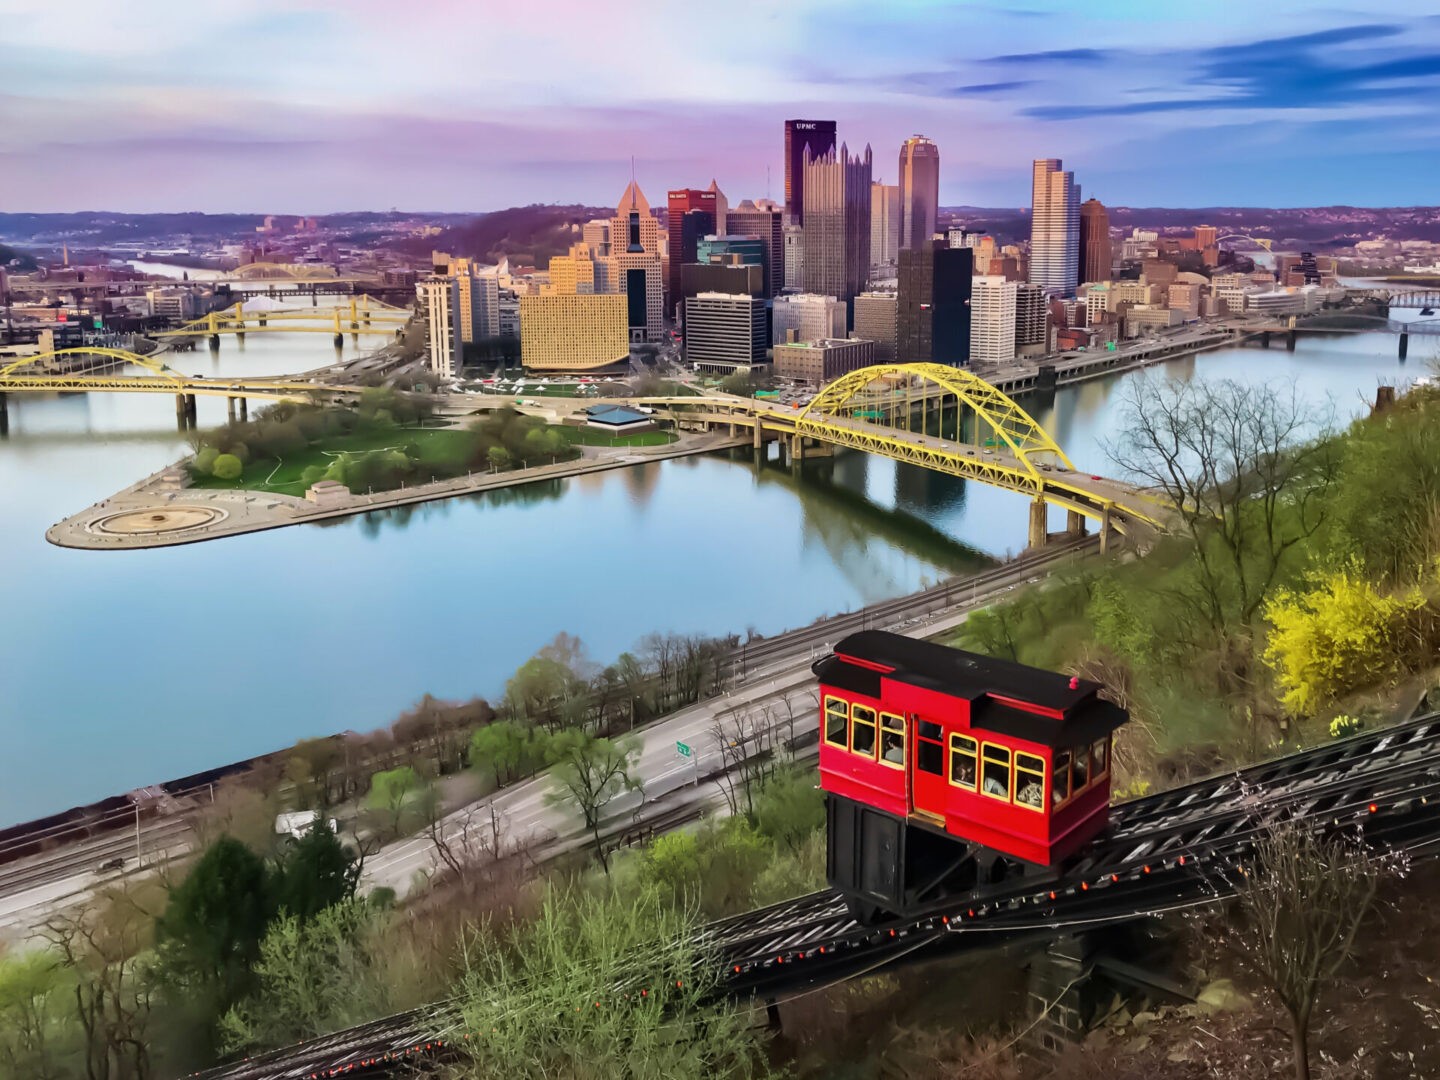 Dusk city Scape of Pittsburgh Pennsylvania at the confluence of the Ohio, Monongahela and Allegheny rivers